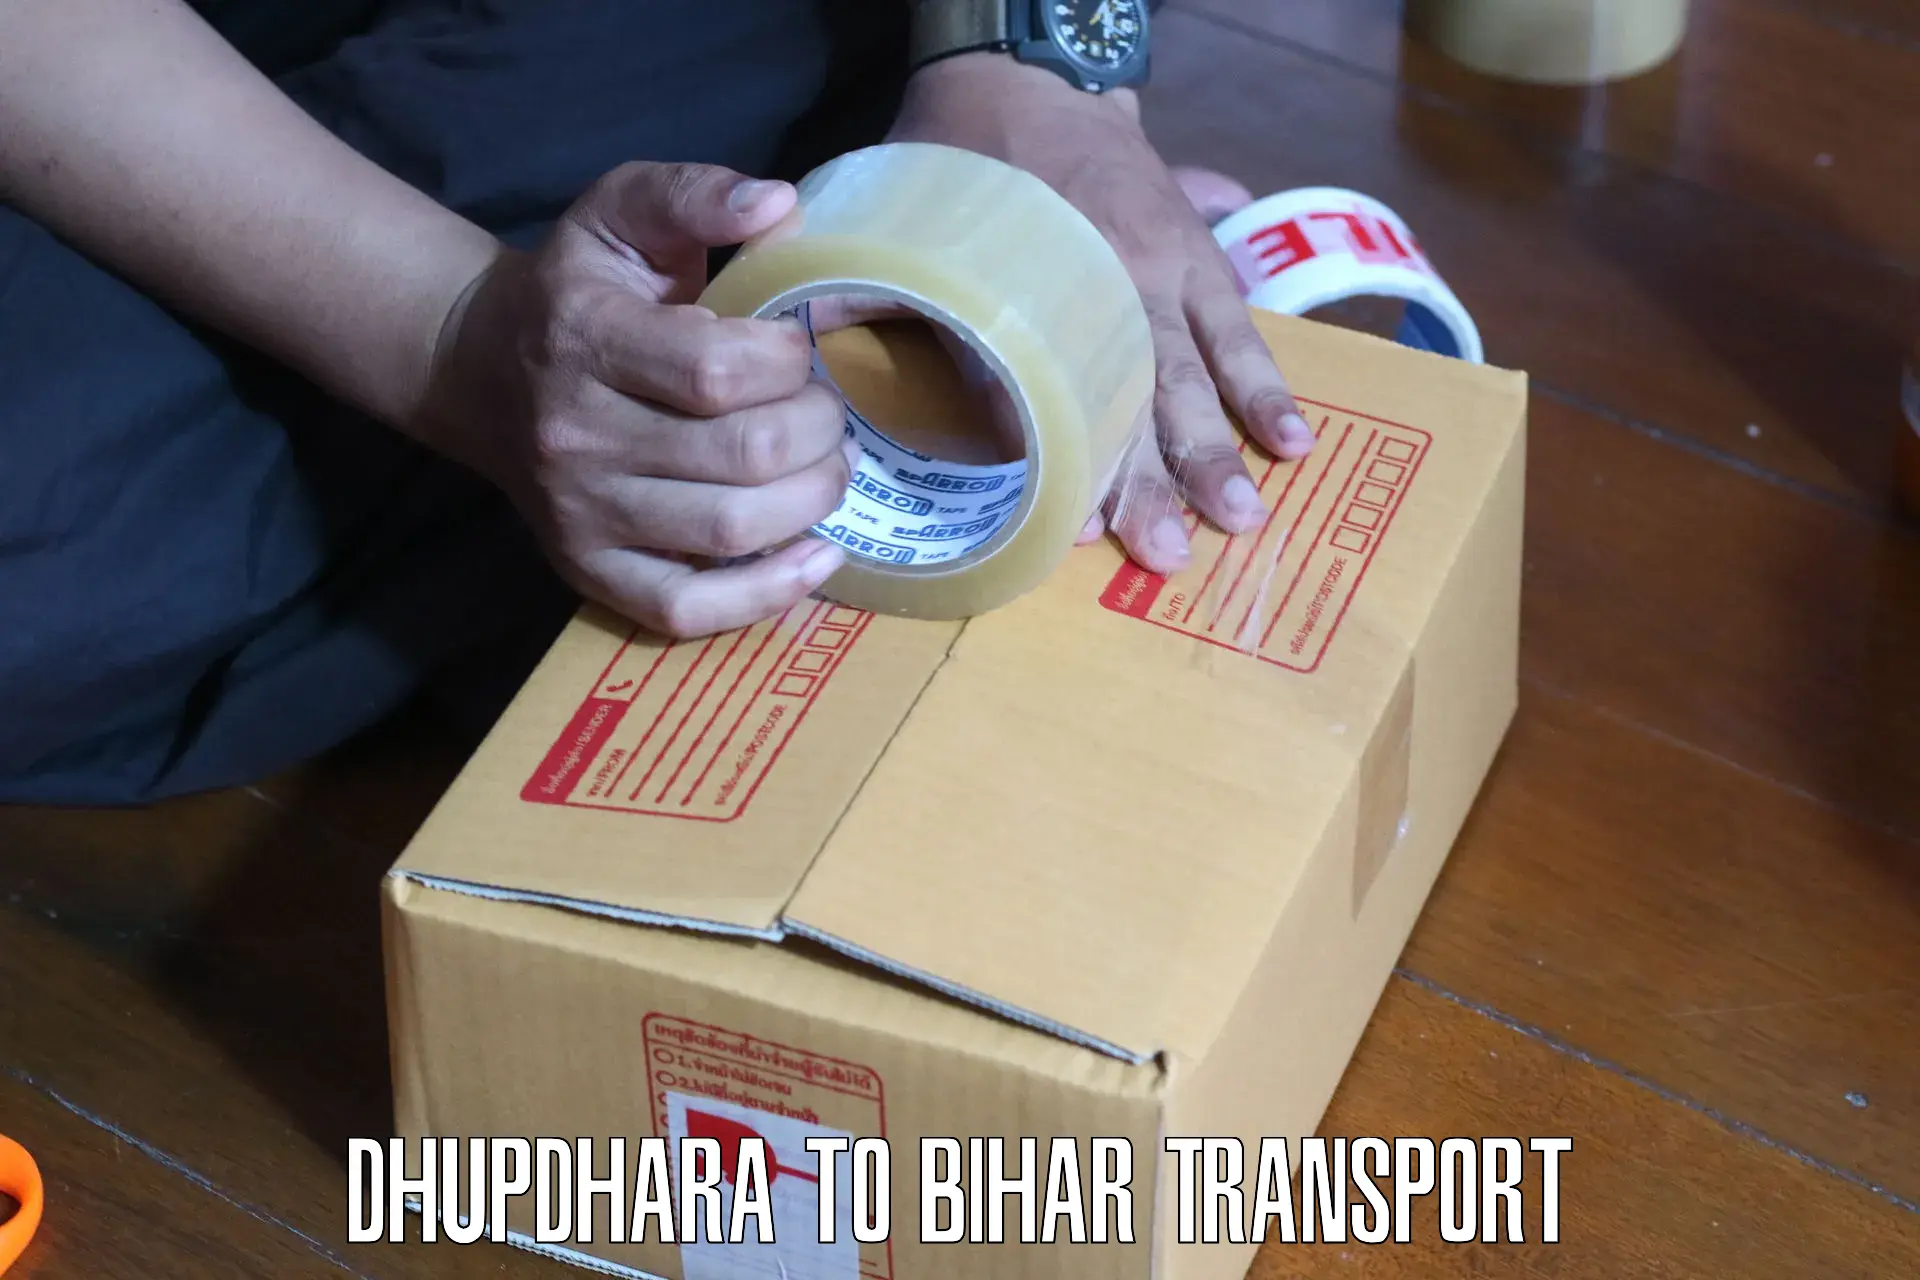 Parcel transport services Dhupdhara to Supaul